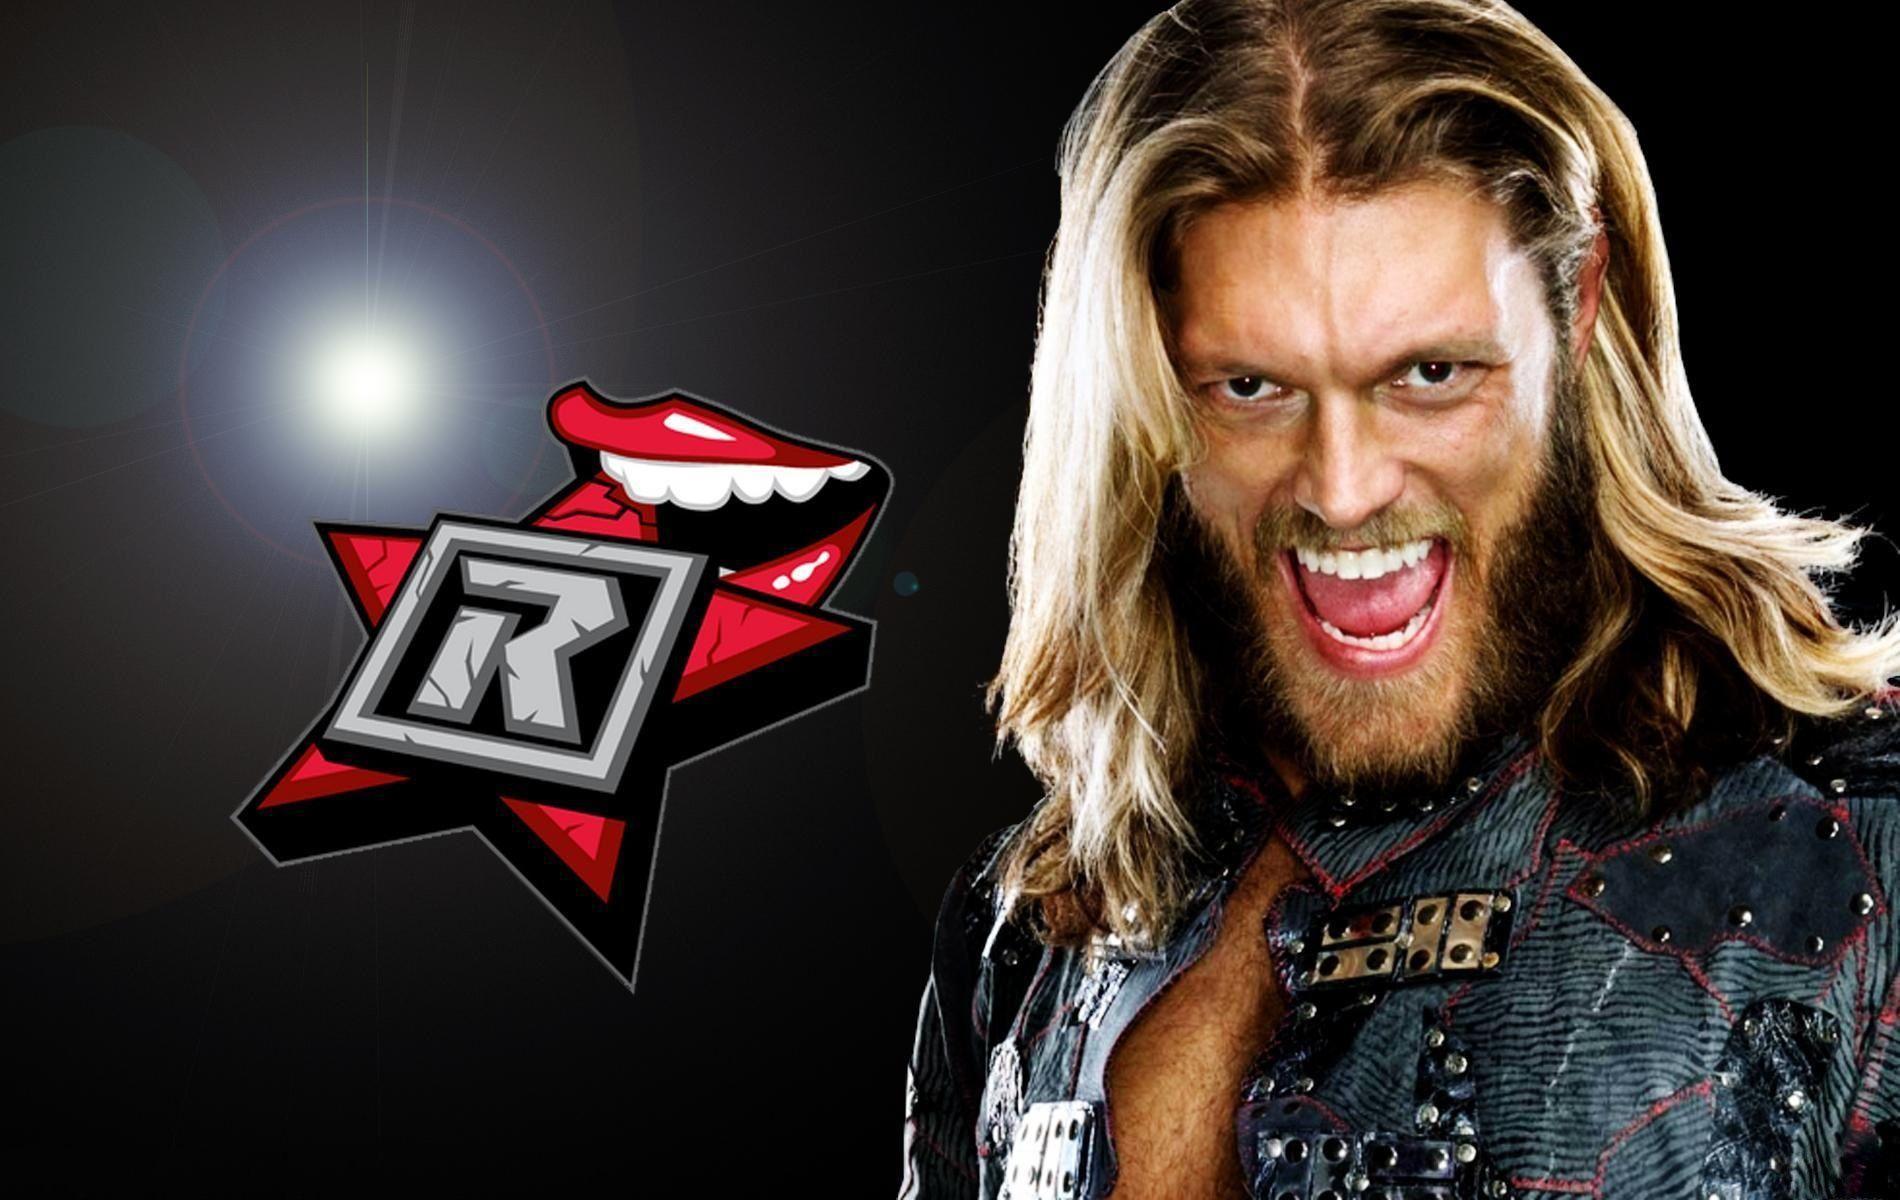 WWE HD Wallpaper for Desktop, iPhone, iPad, and Android. WWE